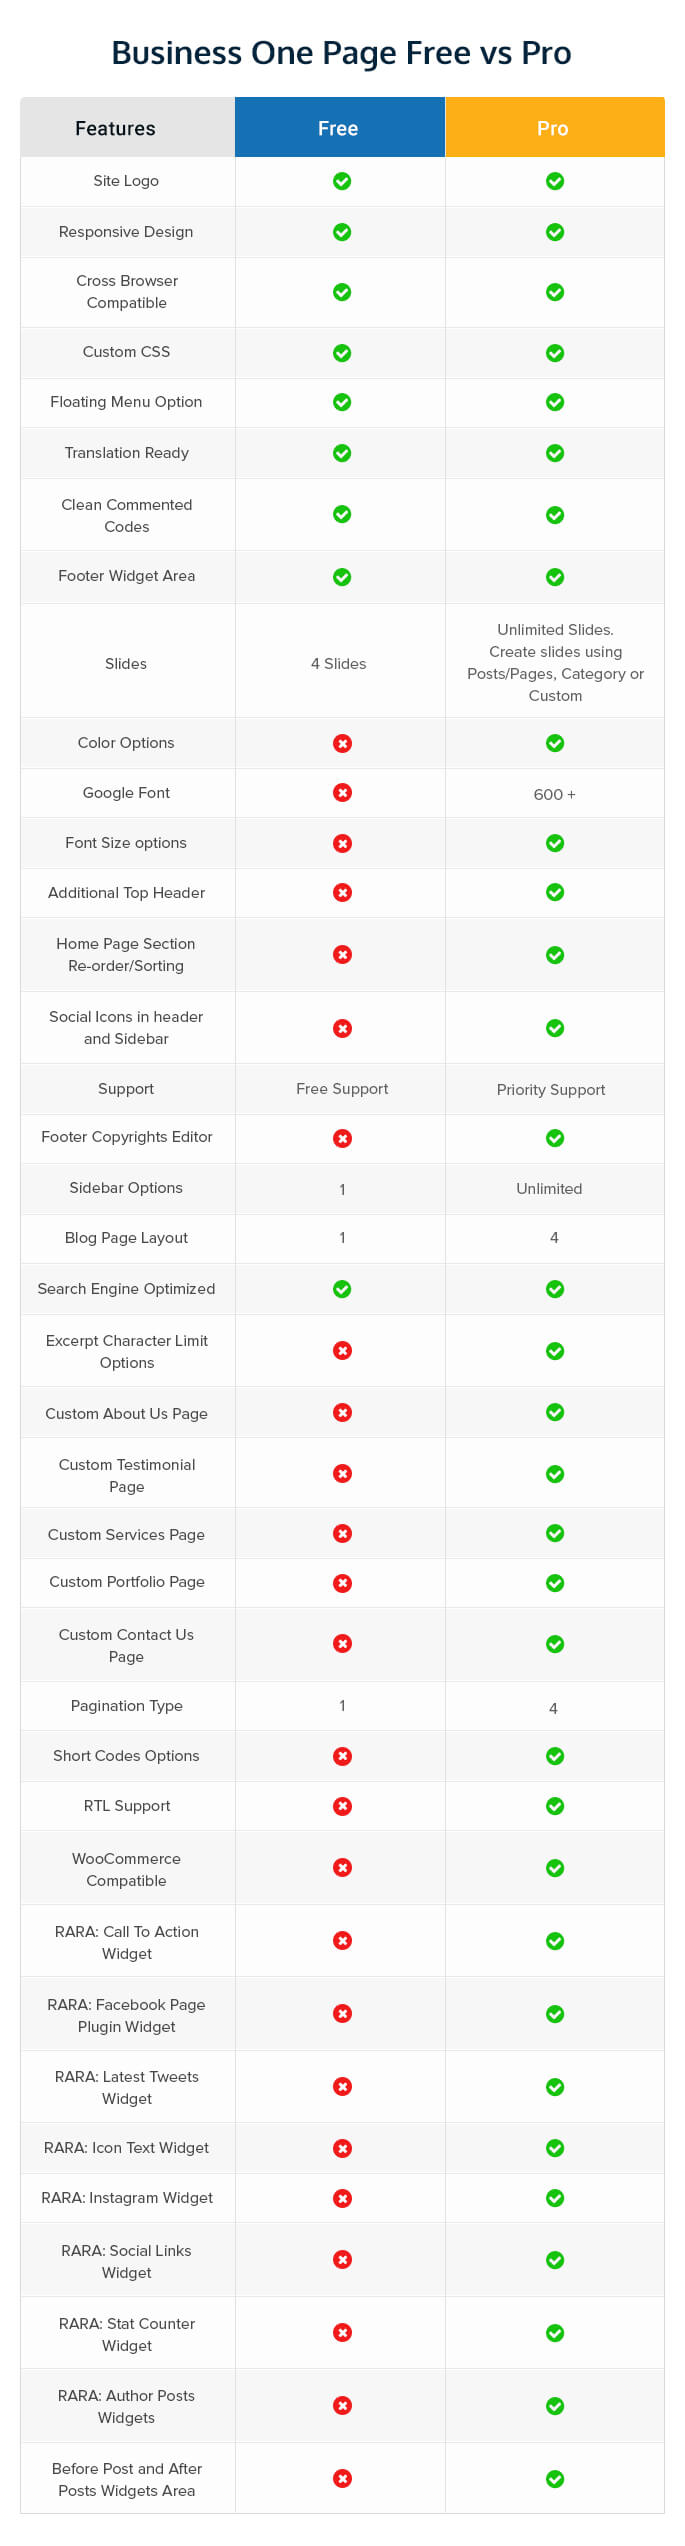 Business one page free Vs pro comparison chart